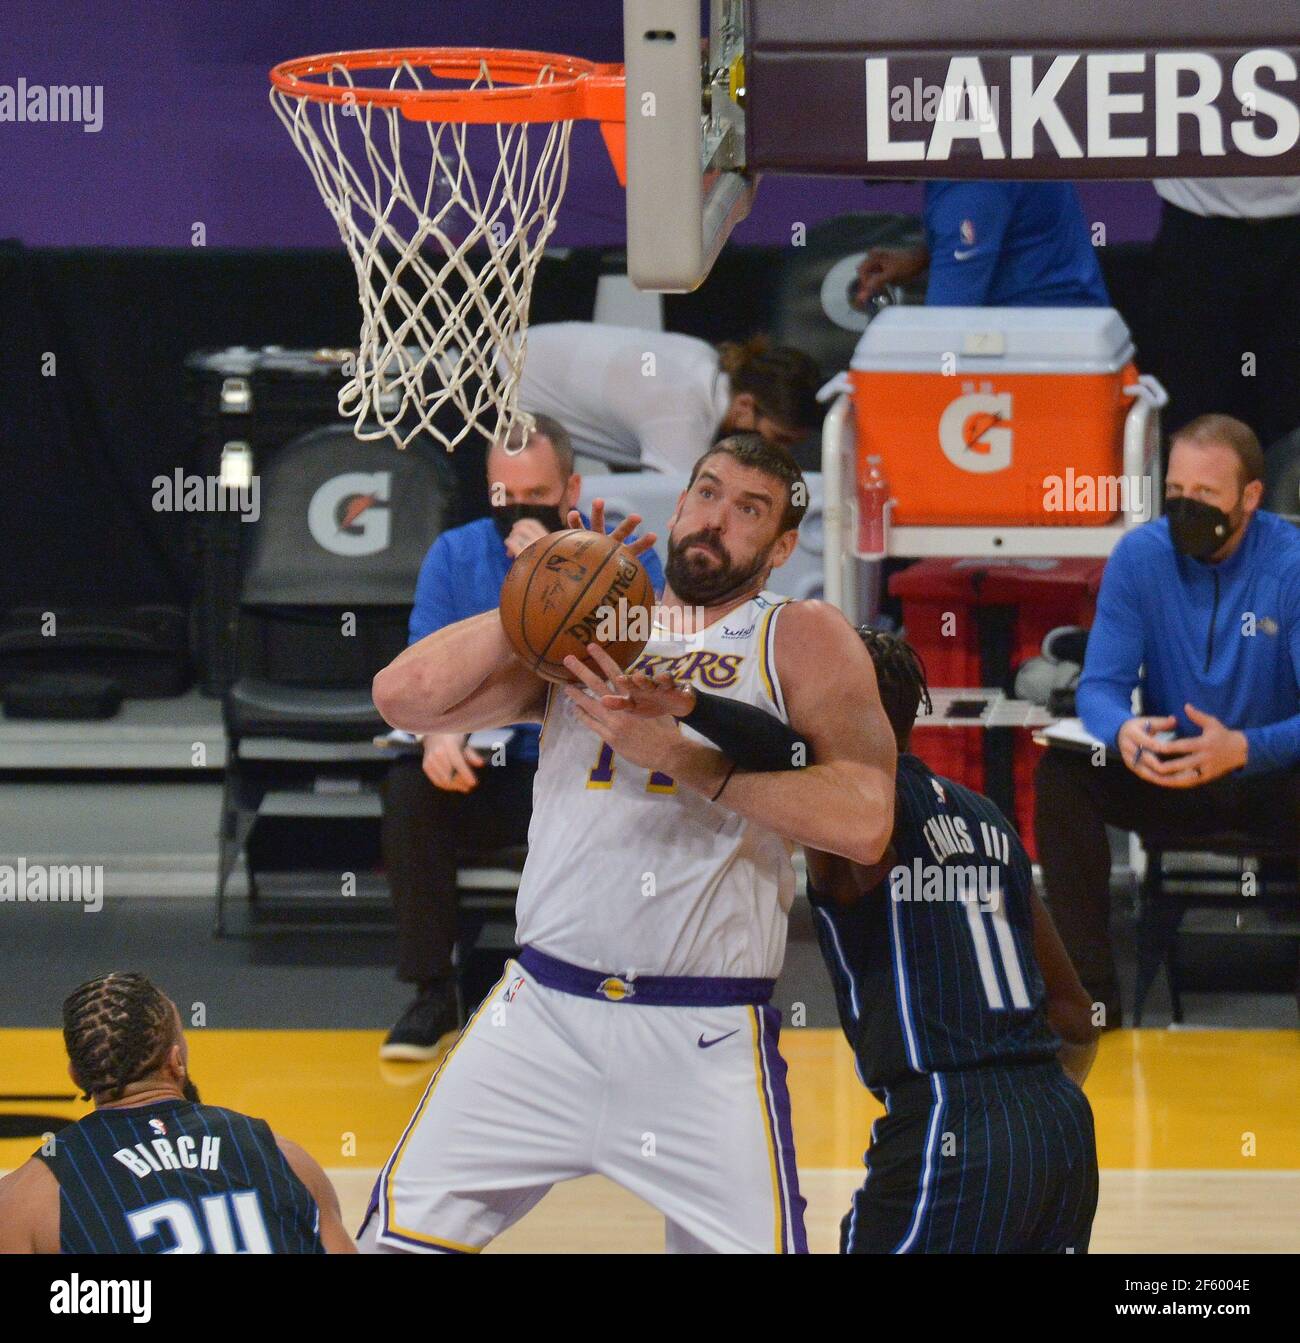 Los Angeles, United States. 29th Mar, 2021. Los Angeles Lakers' center Marc Gasol is fouled by Orlando Magic forward James Ennis III during the first half at Staples Center in Los Angeles on Sunday, March 28, 2021. The Lakers defeated the Magic 96-93. Photo by Jim Ruymen/UPI Credit: UPI/Alamy Live News Stock Photo